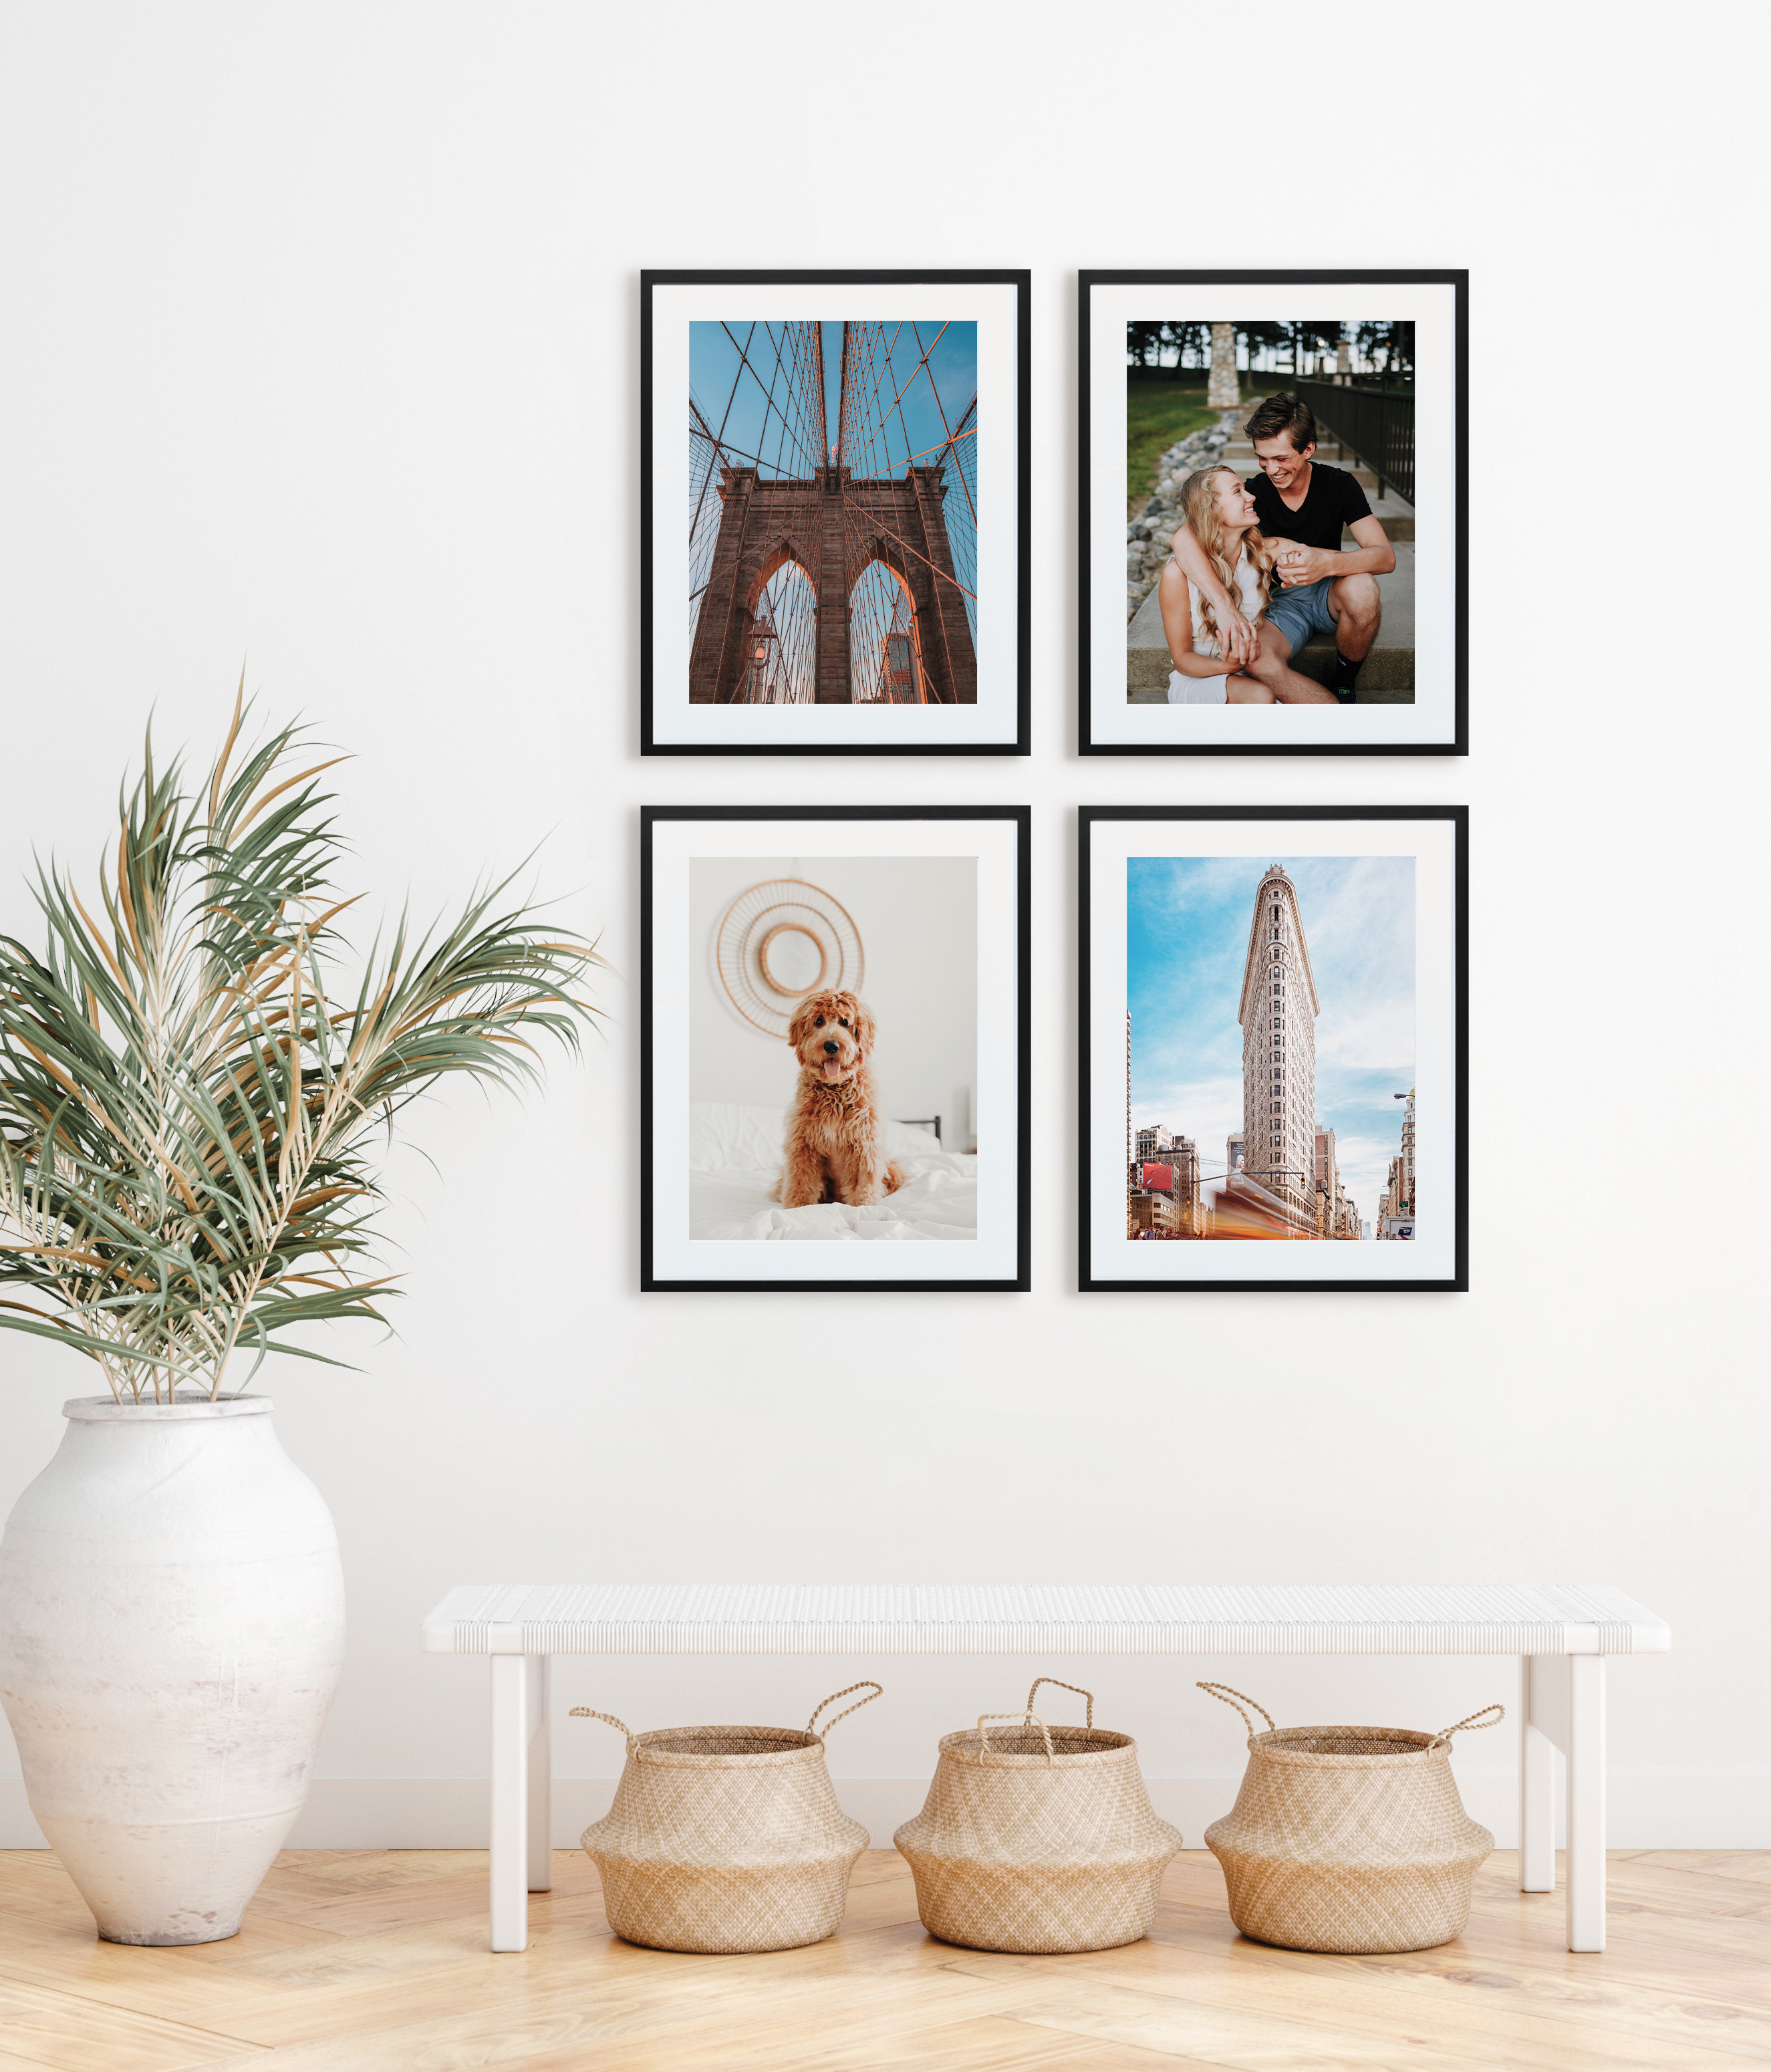 Gallery wall of framed prints